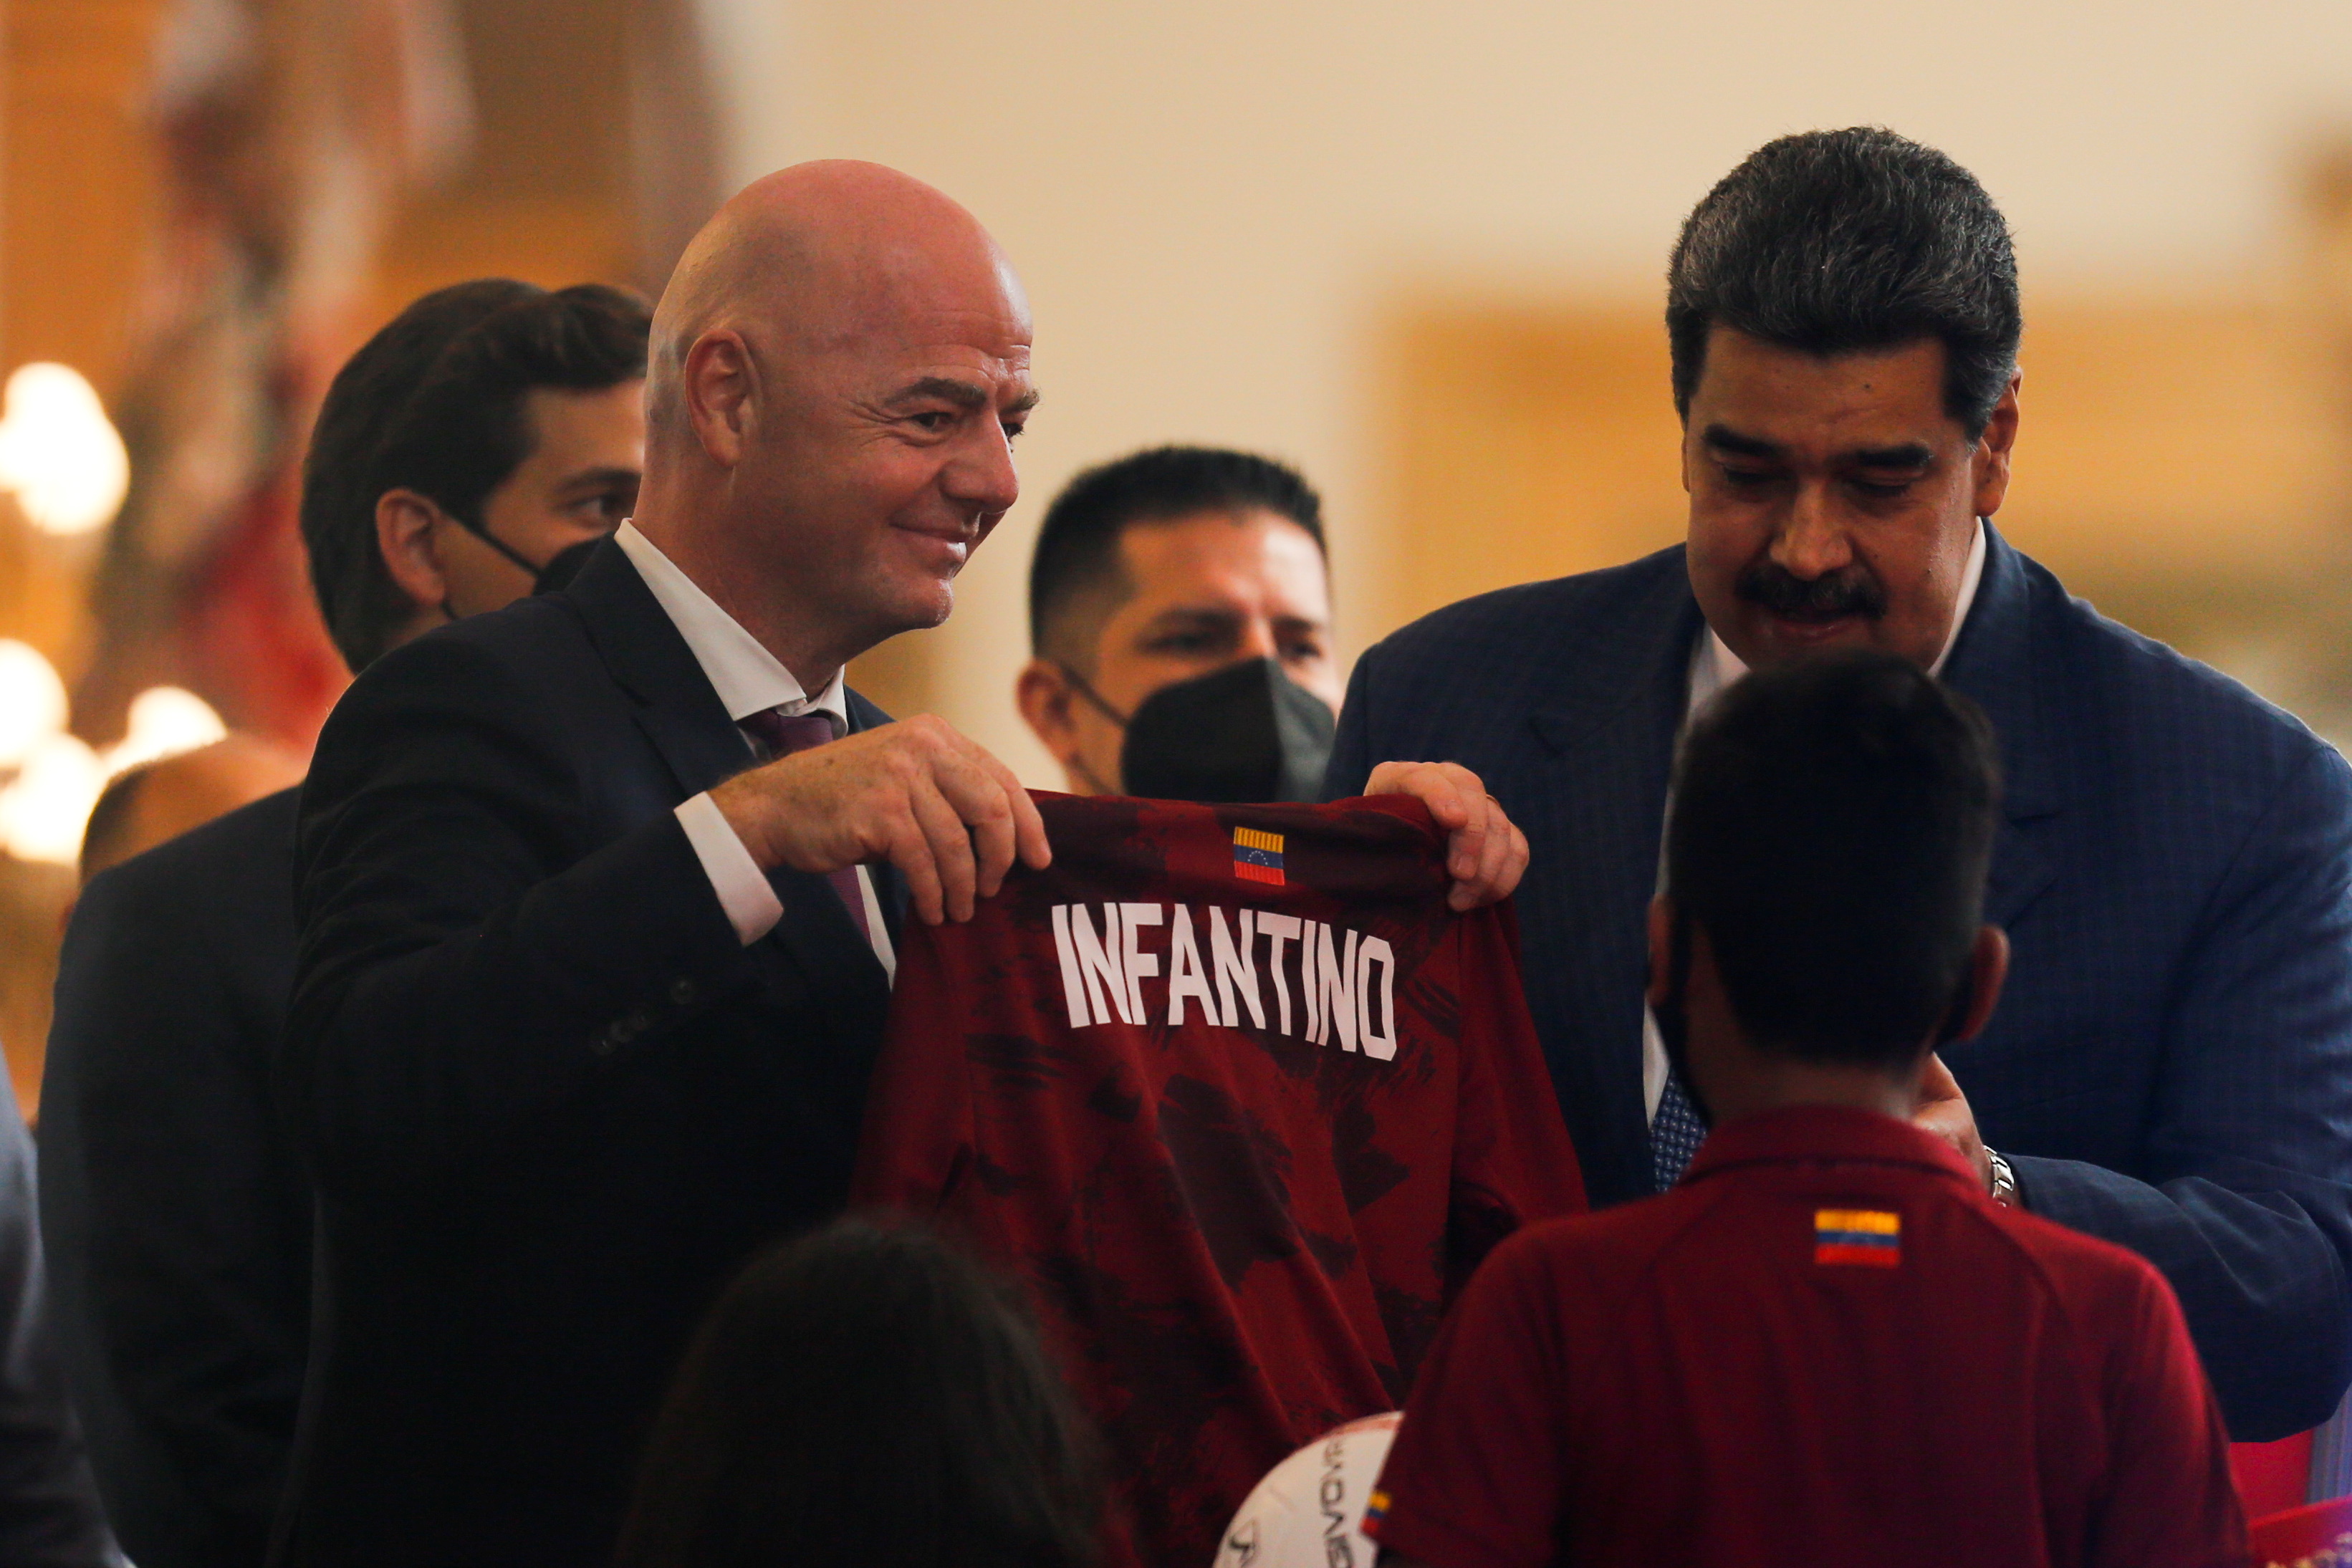 FIFA President Gianni Infantino is presented with a soccer jersey with his name next to Venezuela's President Nicolas Maduro at the Miraflores Palace during his visit in Caracas, Venezuela October 15, 2021. REUTERS/Leonardo Fernandez Viloria